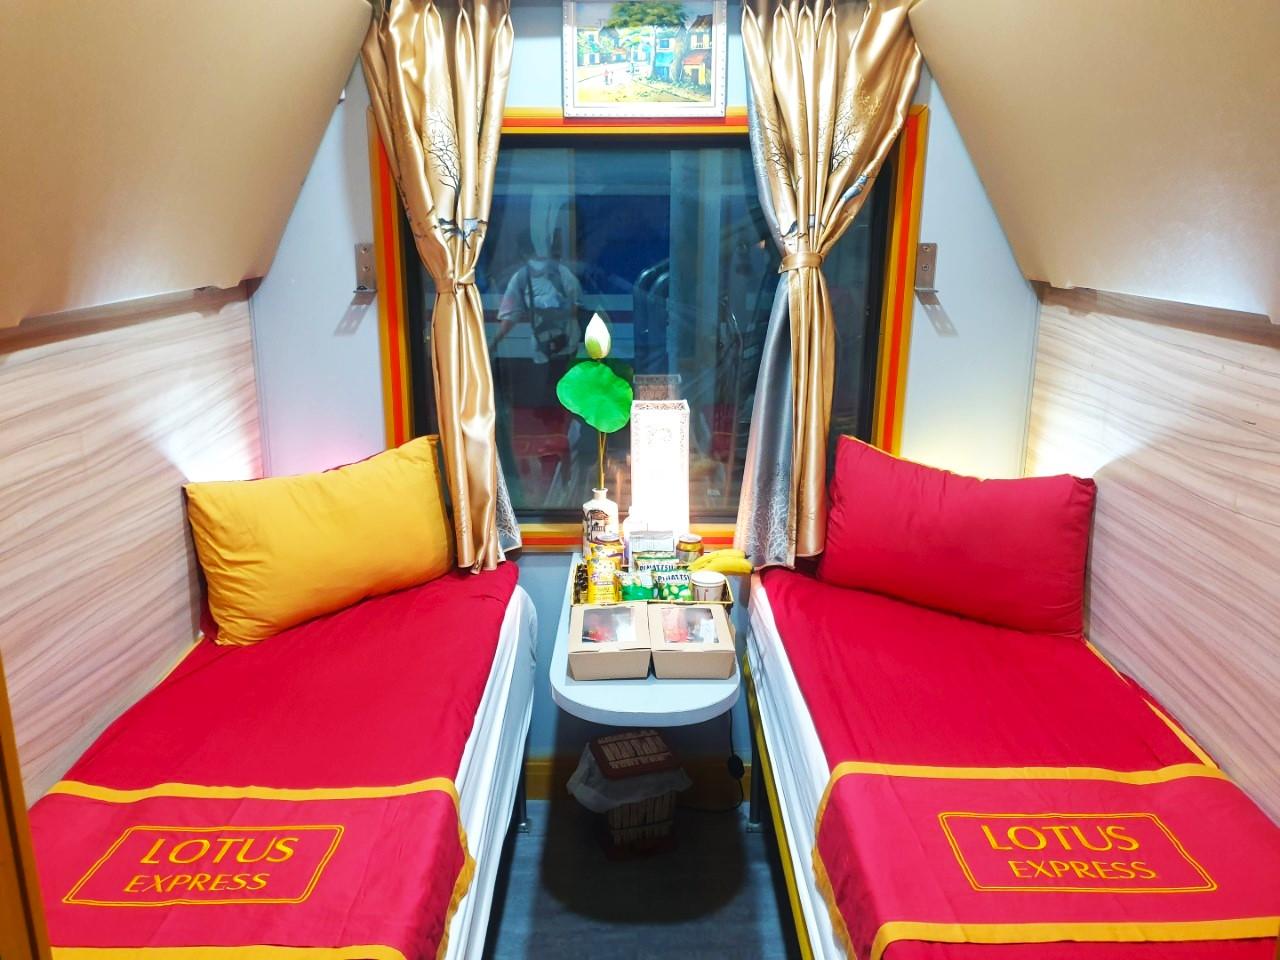 Ninh Binh - Hue in VIP 2 berth-cabin on SE19 (22h02 – 09h44) - Price per person not per cabin (VIP 2 Sleepers, One Way)